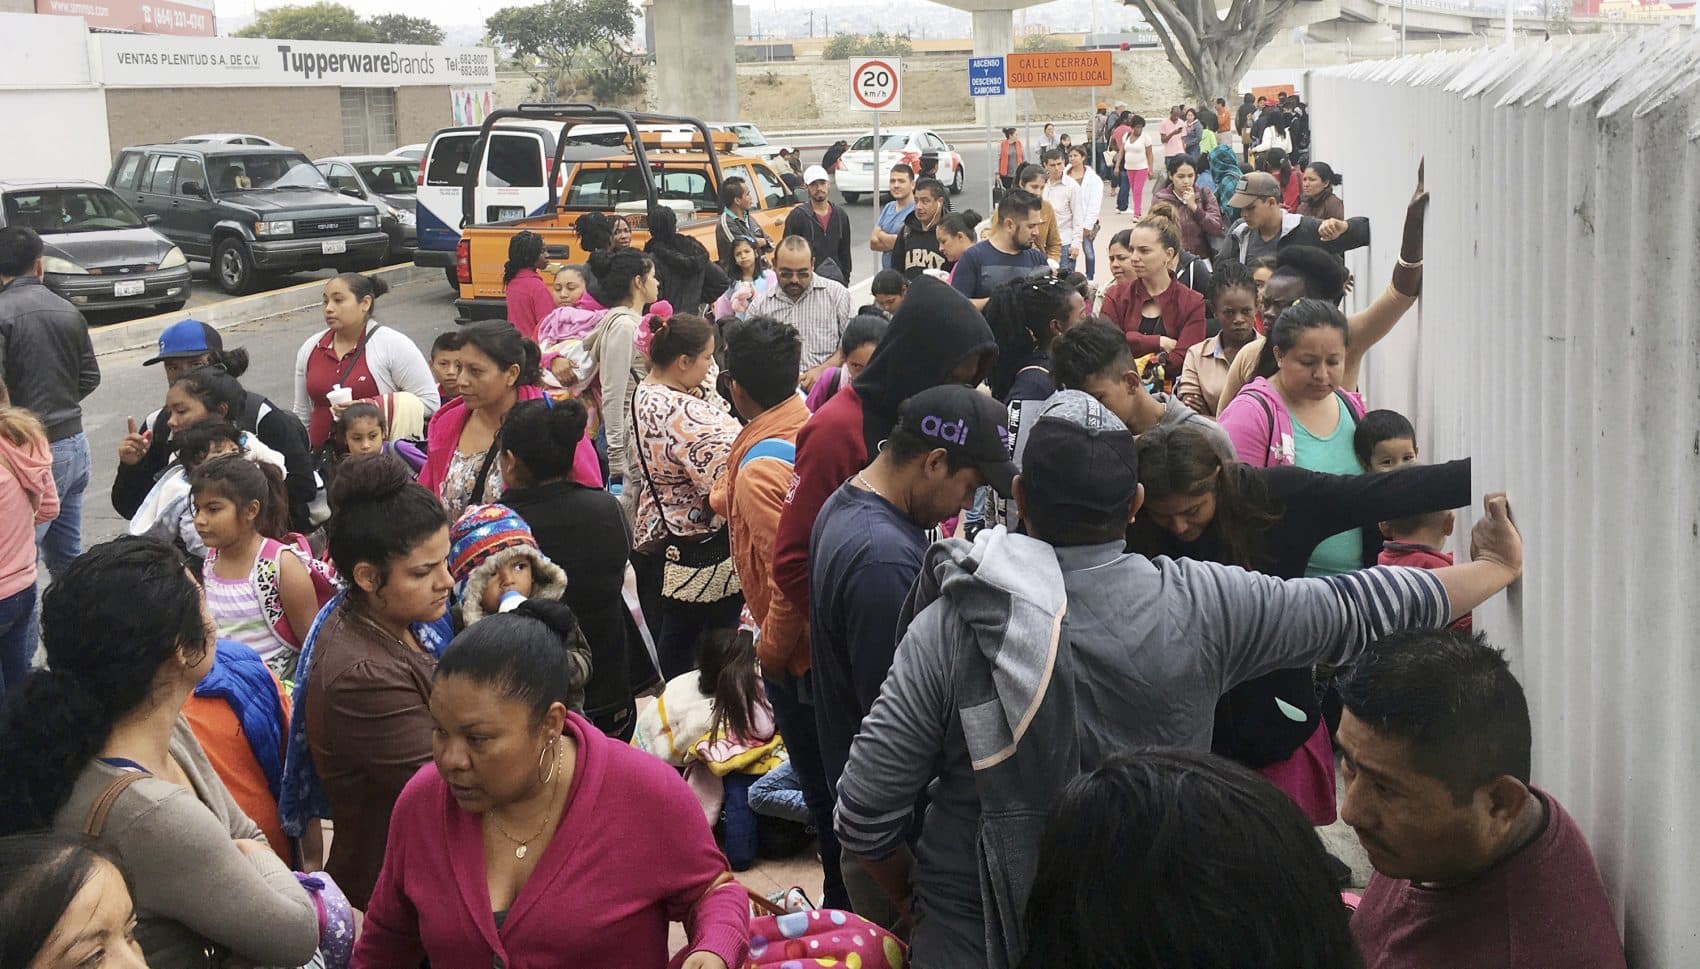 In this Monday, June 4, 2018 file photo, people seeking political asylum in the United States line up to be interviewed in Tijuana, Mexico, just across the U.S. border south of San Diego. Immigration judges generally cannot consider domestic and gang violence as grounds for asylum, U.S. Attorney General Jeff Sessions said Monday, June 11, 2018 in a ruling that could affect large numbers of Central Americans who have increasingly turned to the United States for protection. (Elliot Spagat/AP)